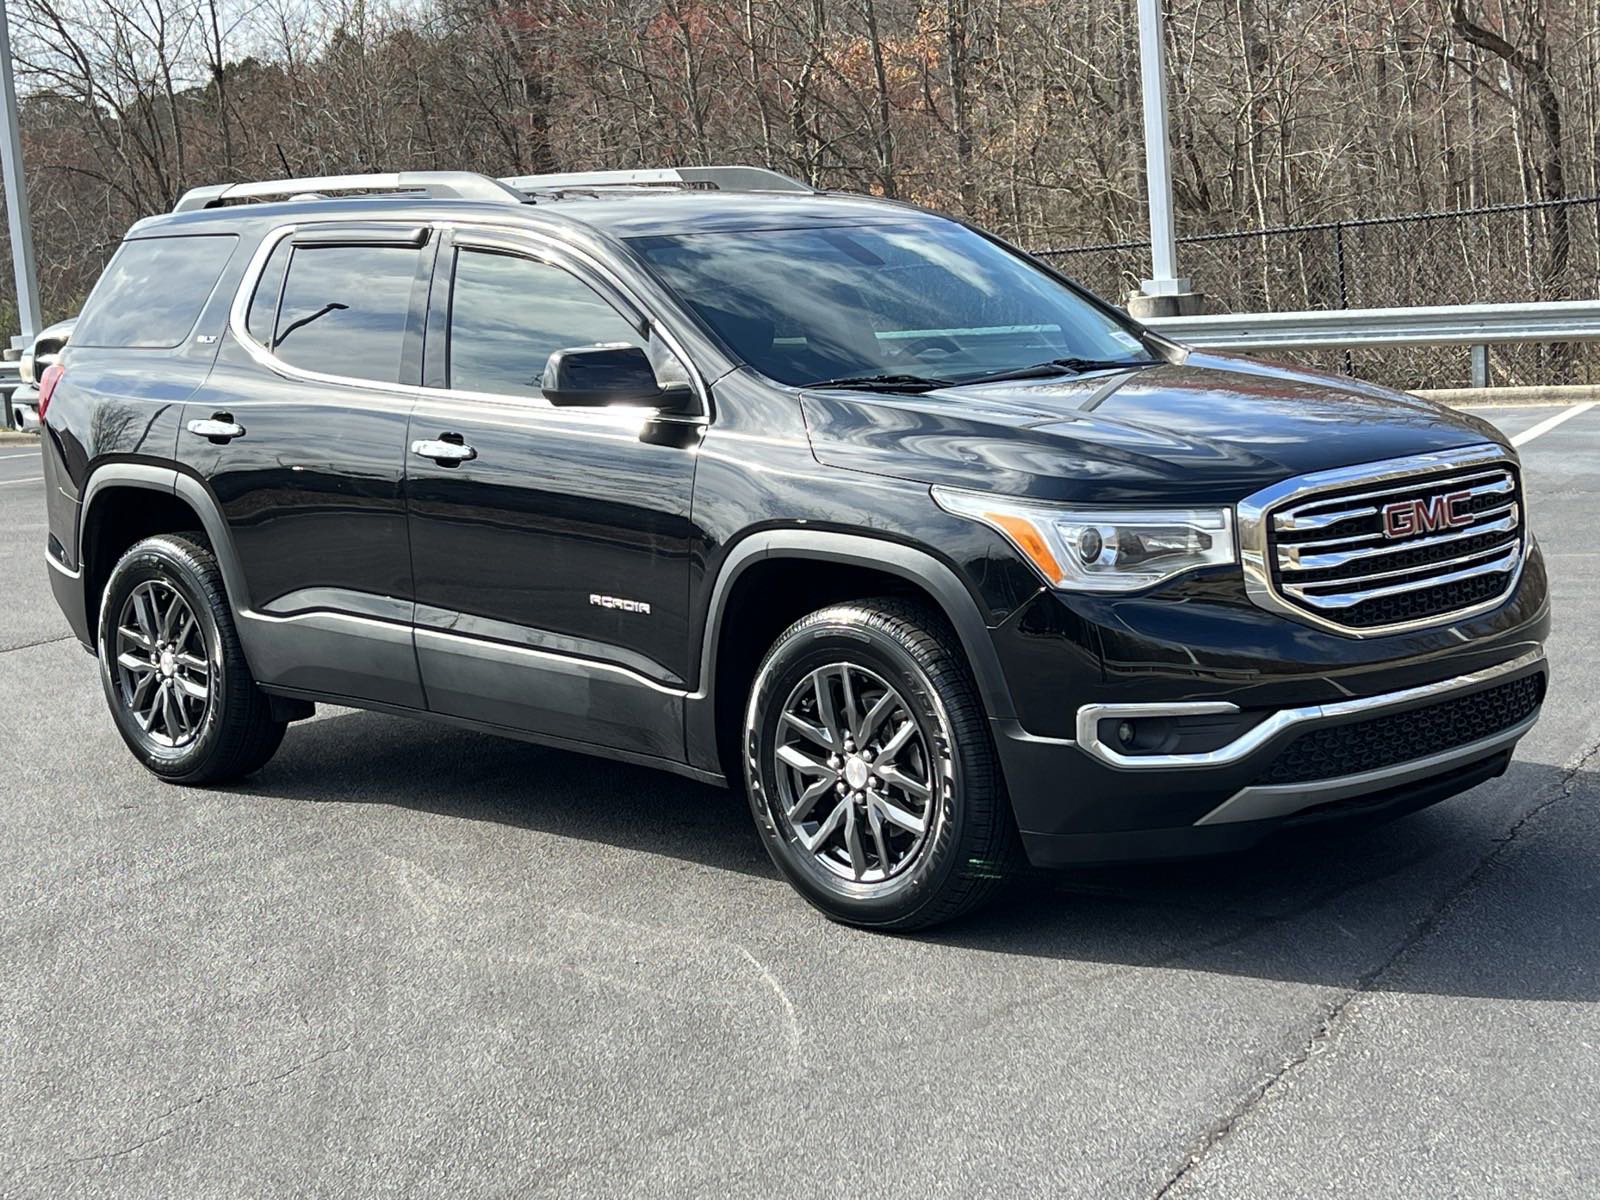 Pre-Owned 2019 GMC Acadia SLT SUV in Cary #Q50312A | Hendrick Dodge Cary